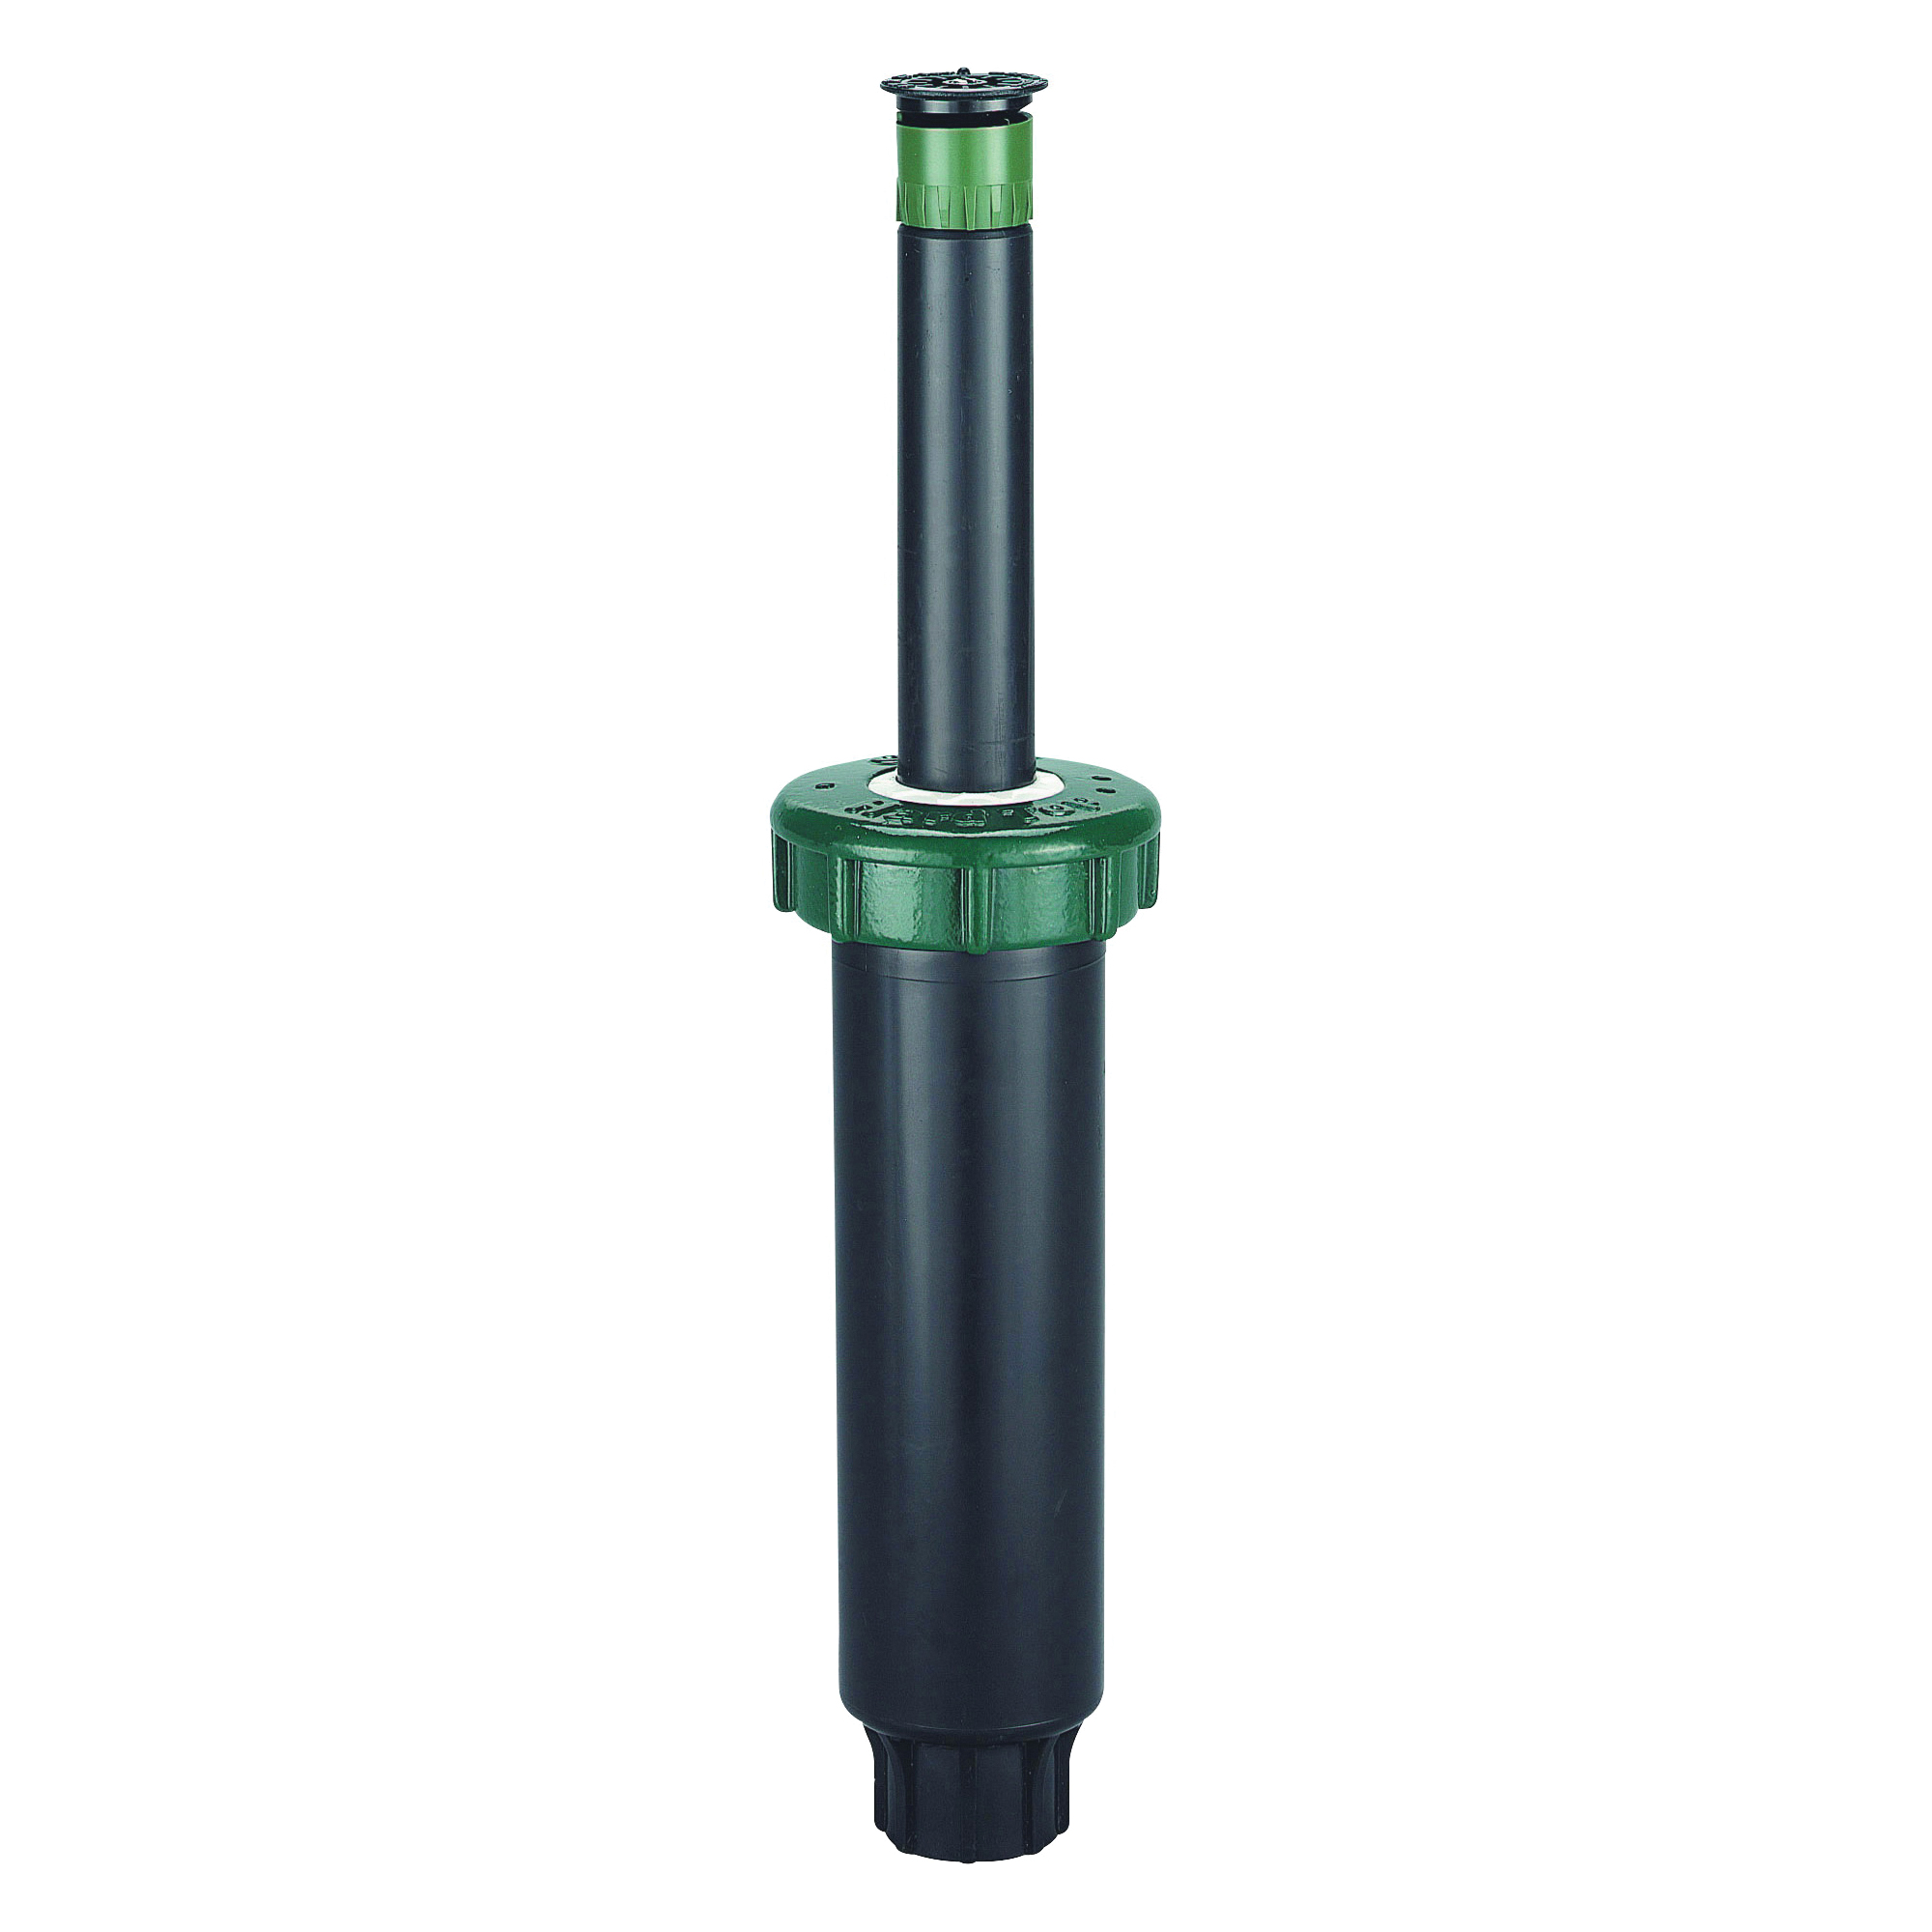 54118 Sprinkler Head with Adjustable Nozzle, 1/2 in Connection, MNPT, Plastic